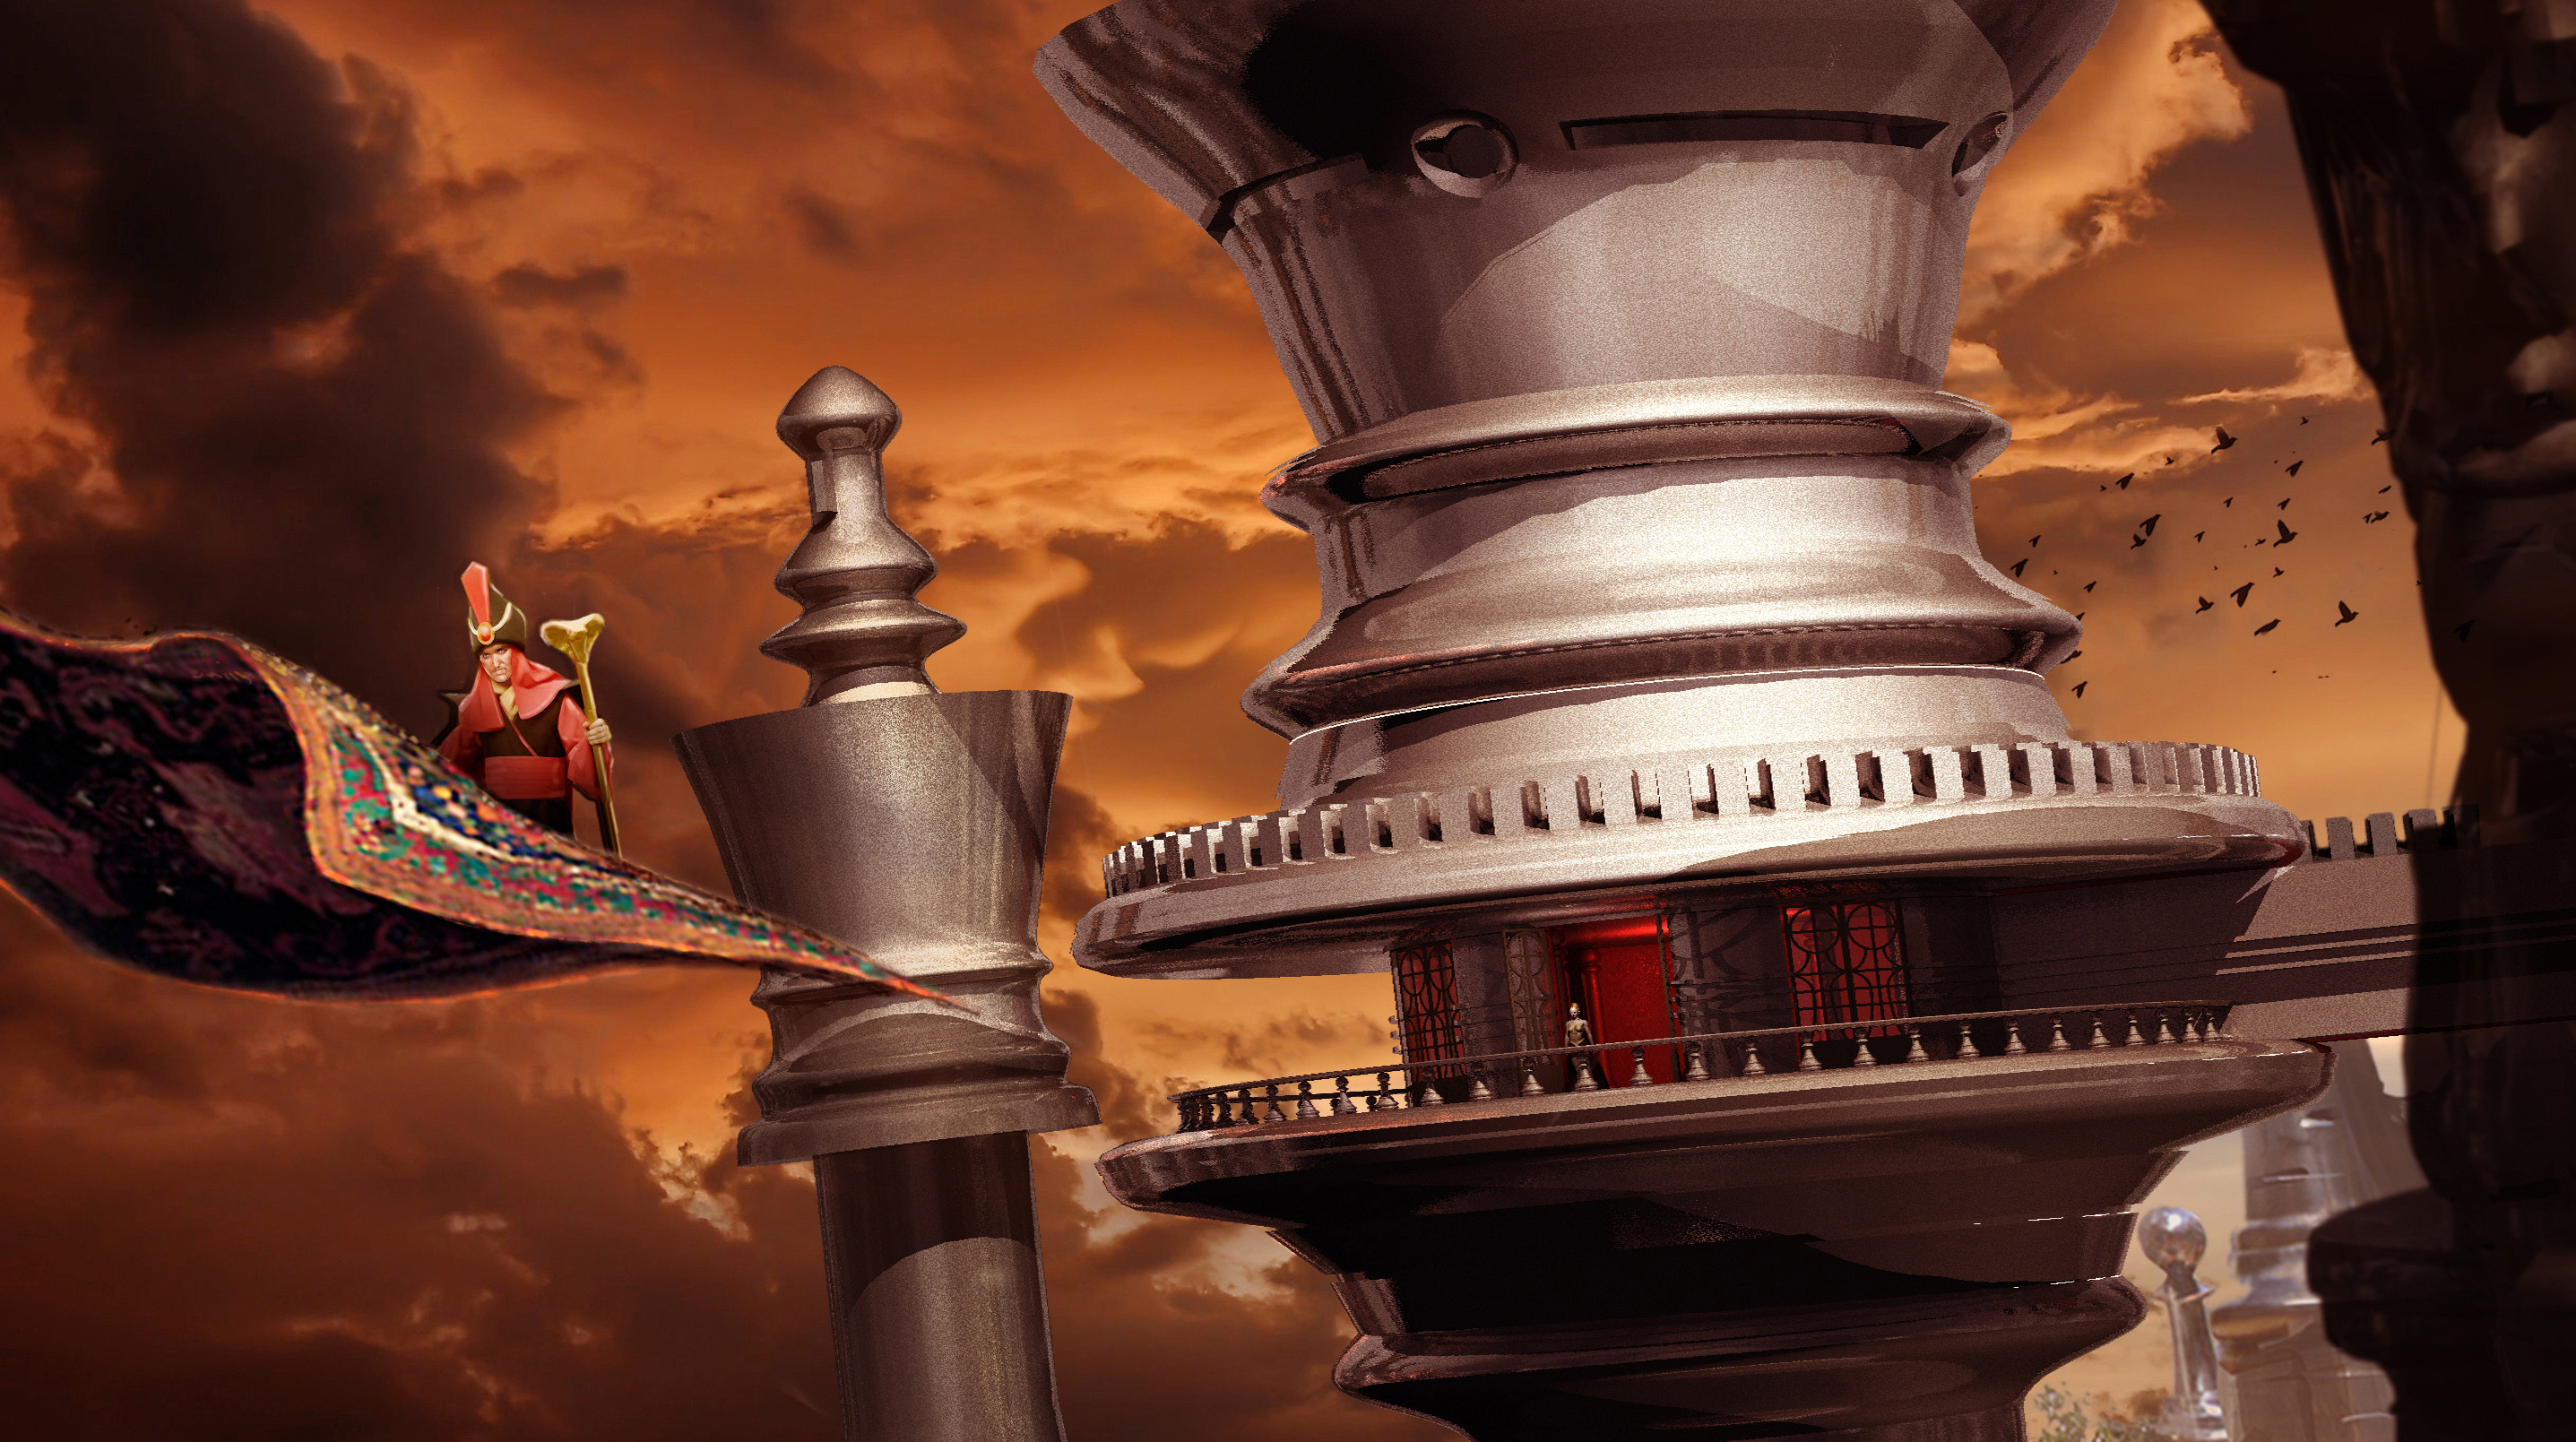 3D Chess Piece City Concept for ABC's Once Upon a Time in Wonderland